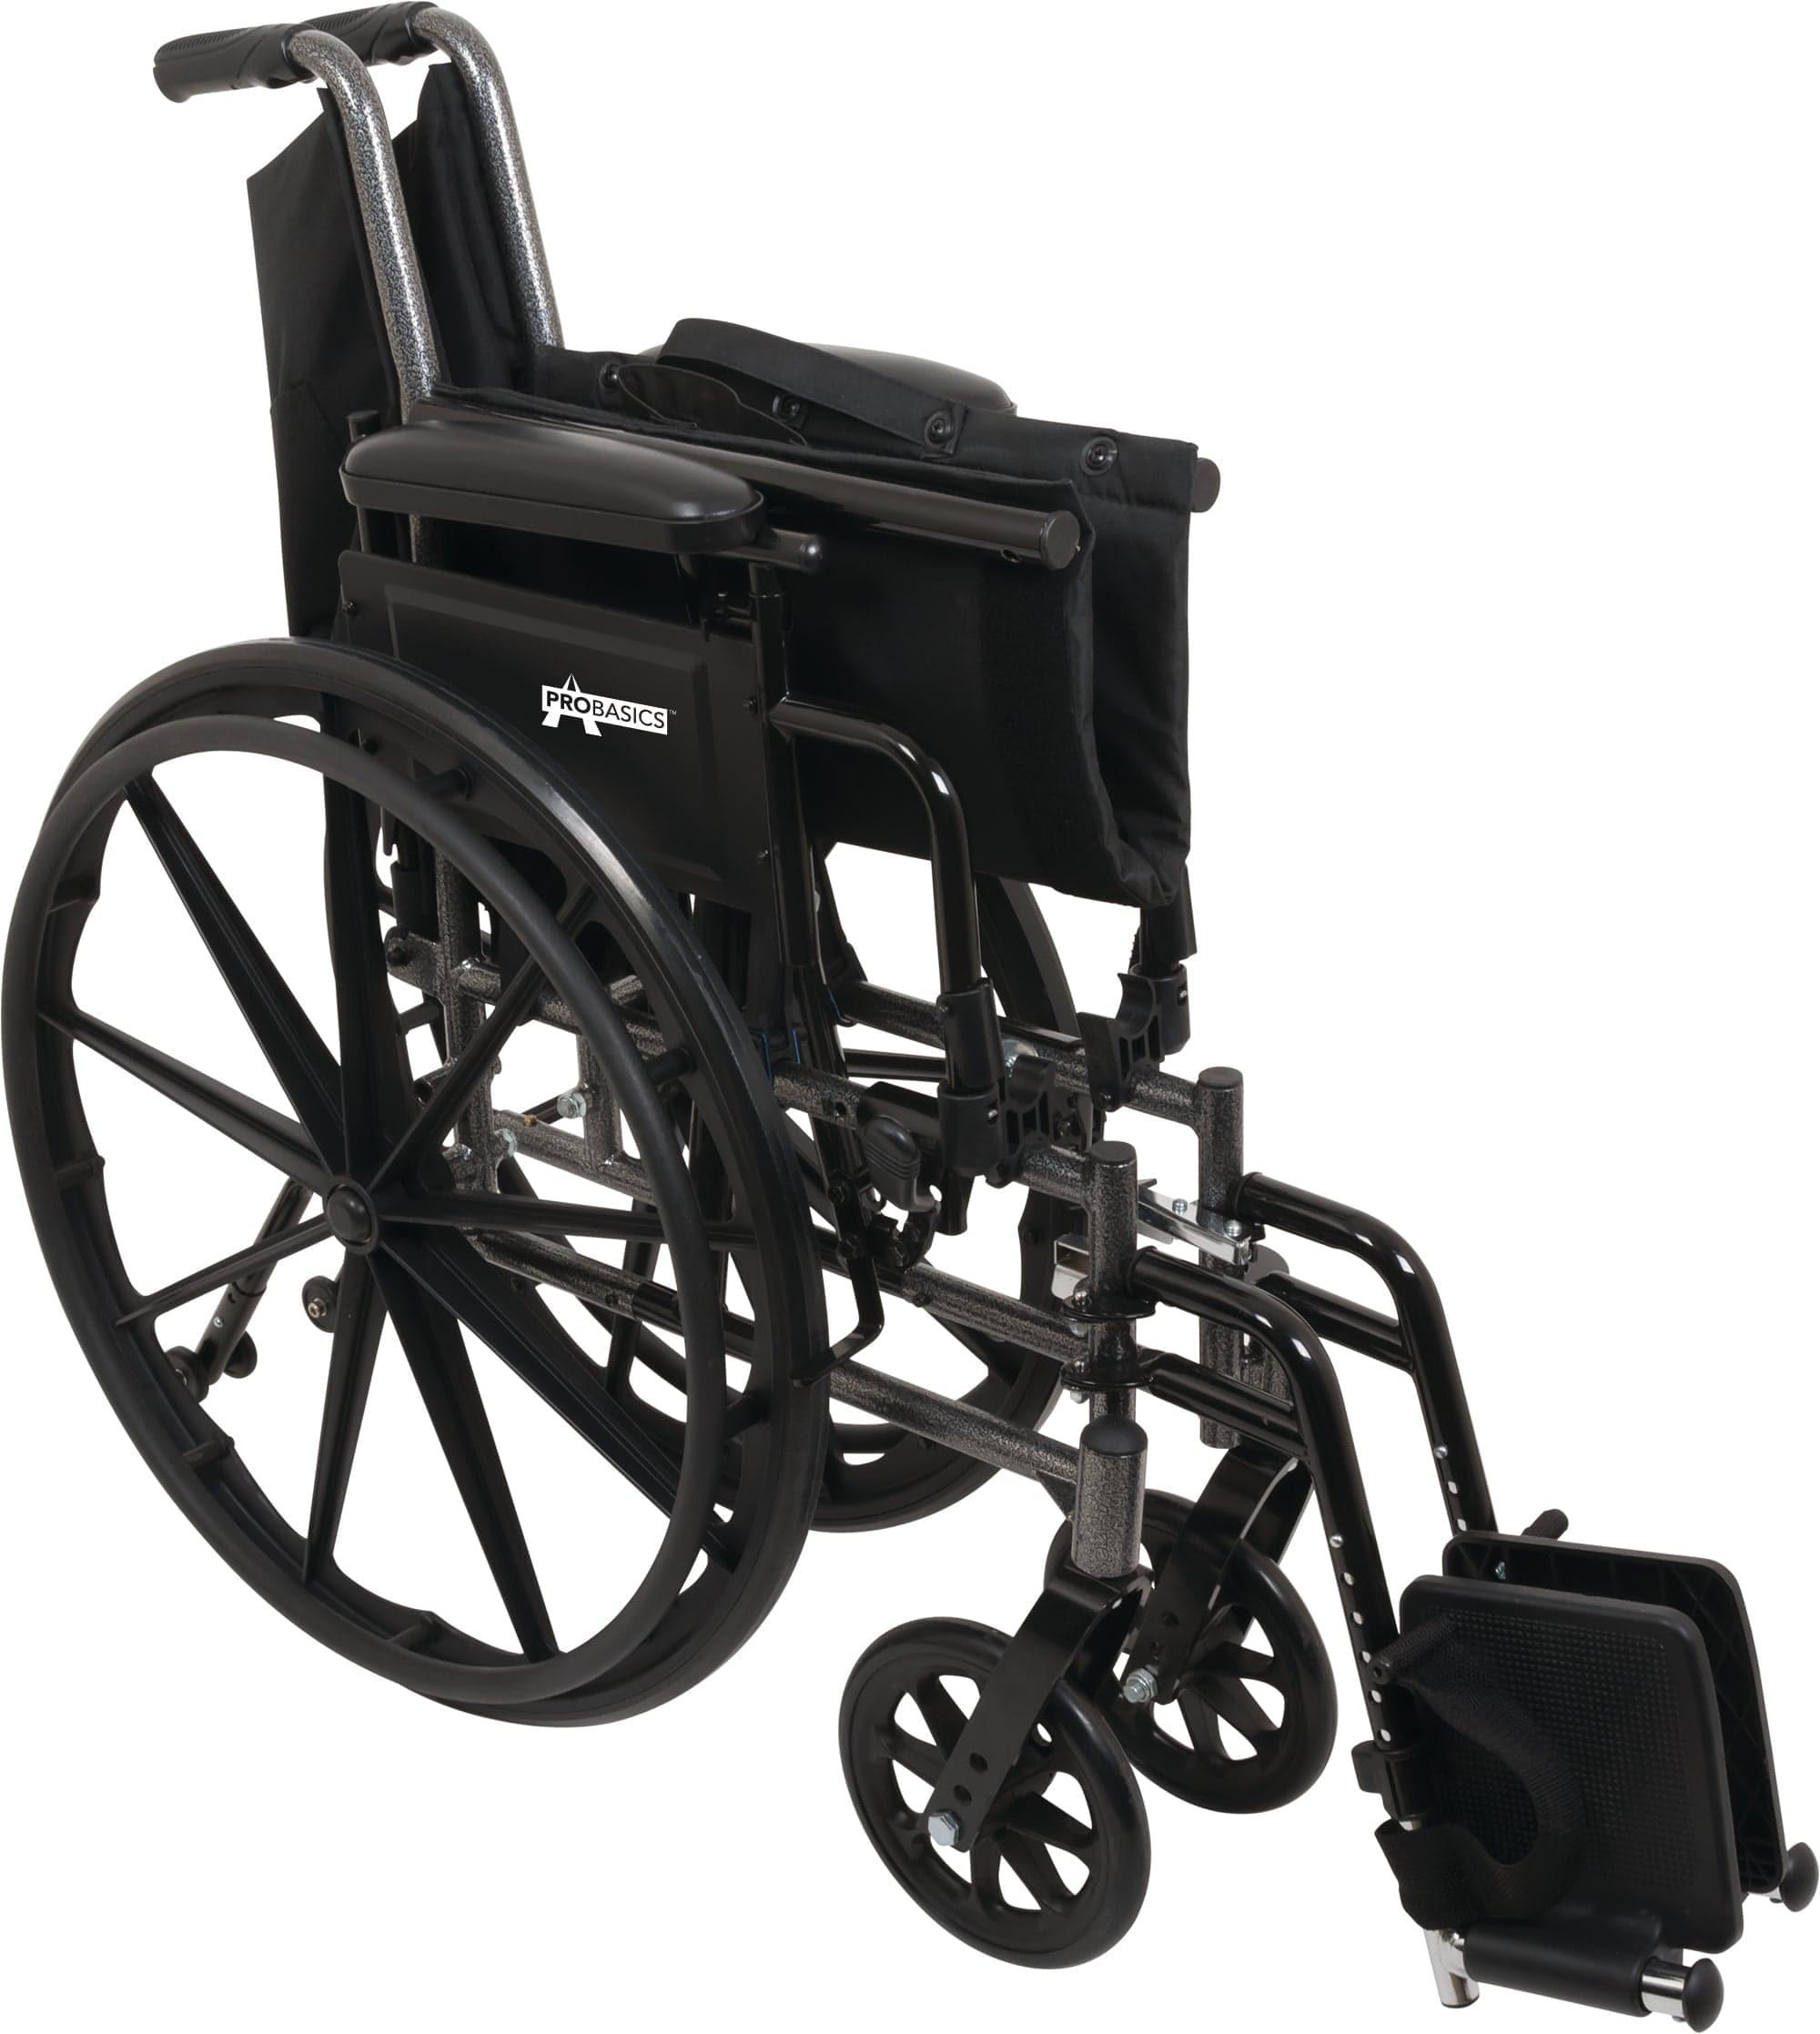 Compass Health Compass Health ProBasics K3 Lightweight Wheelchair with 20" x 16" Seat, WC32016DS